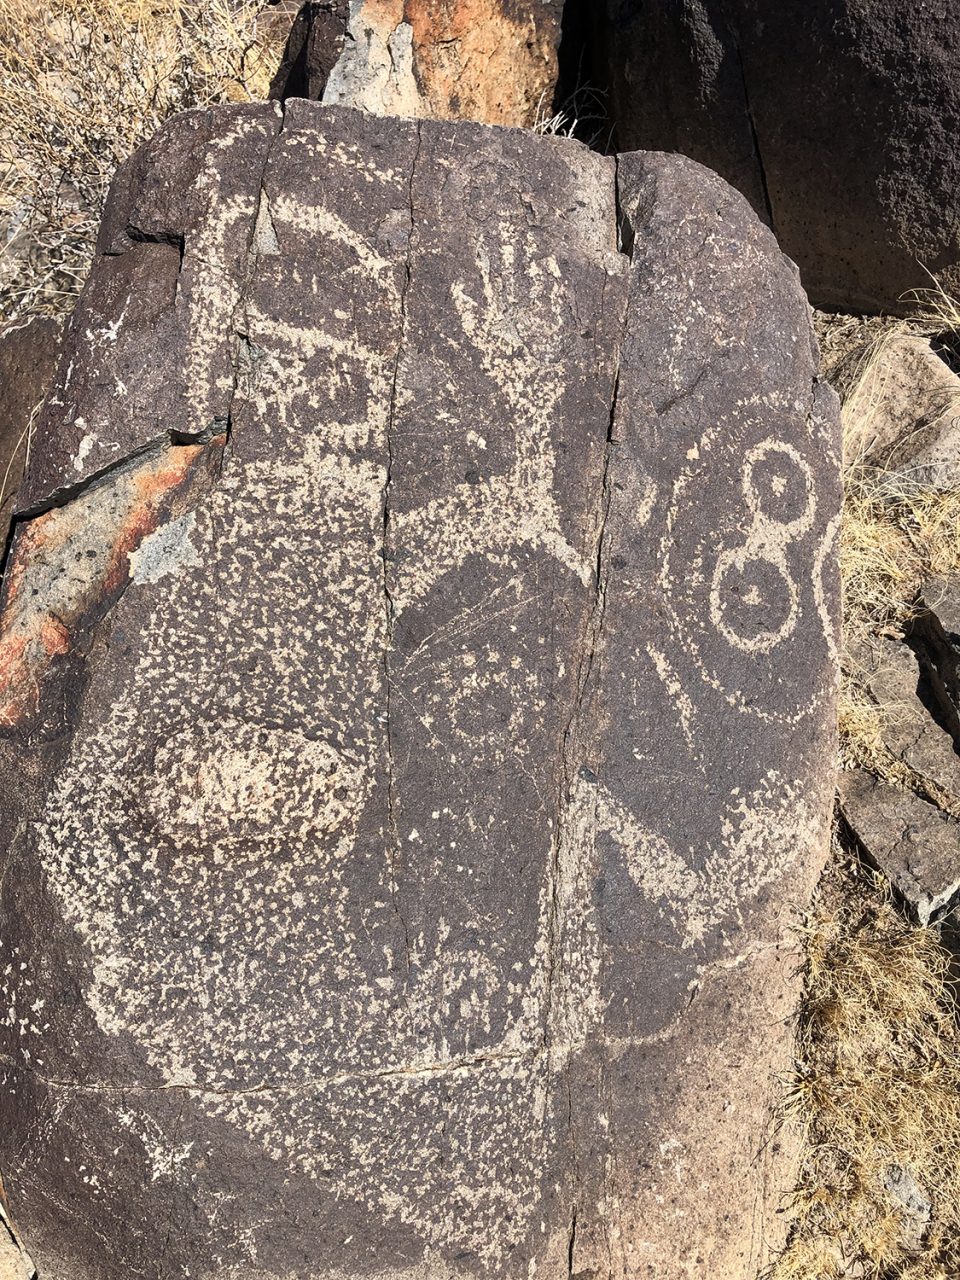 Fantastical creatures at Three Rivers Petroglyph Site in New Mexico. Photograph by Keith Dotson. Copyright 2022.